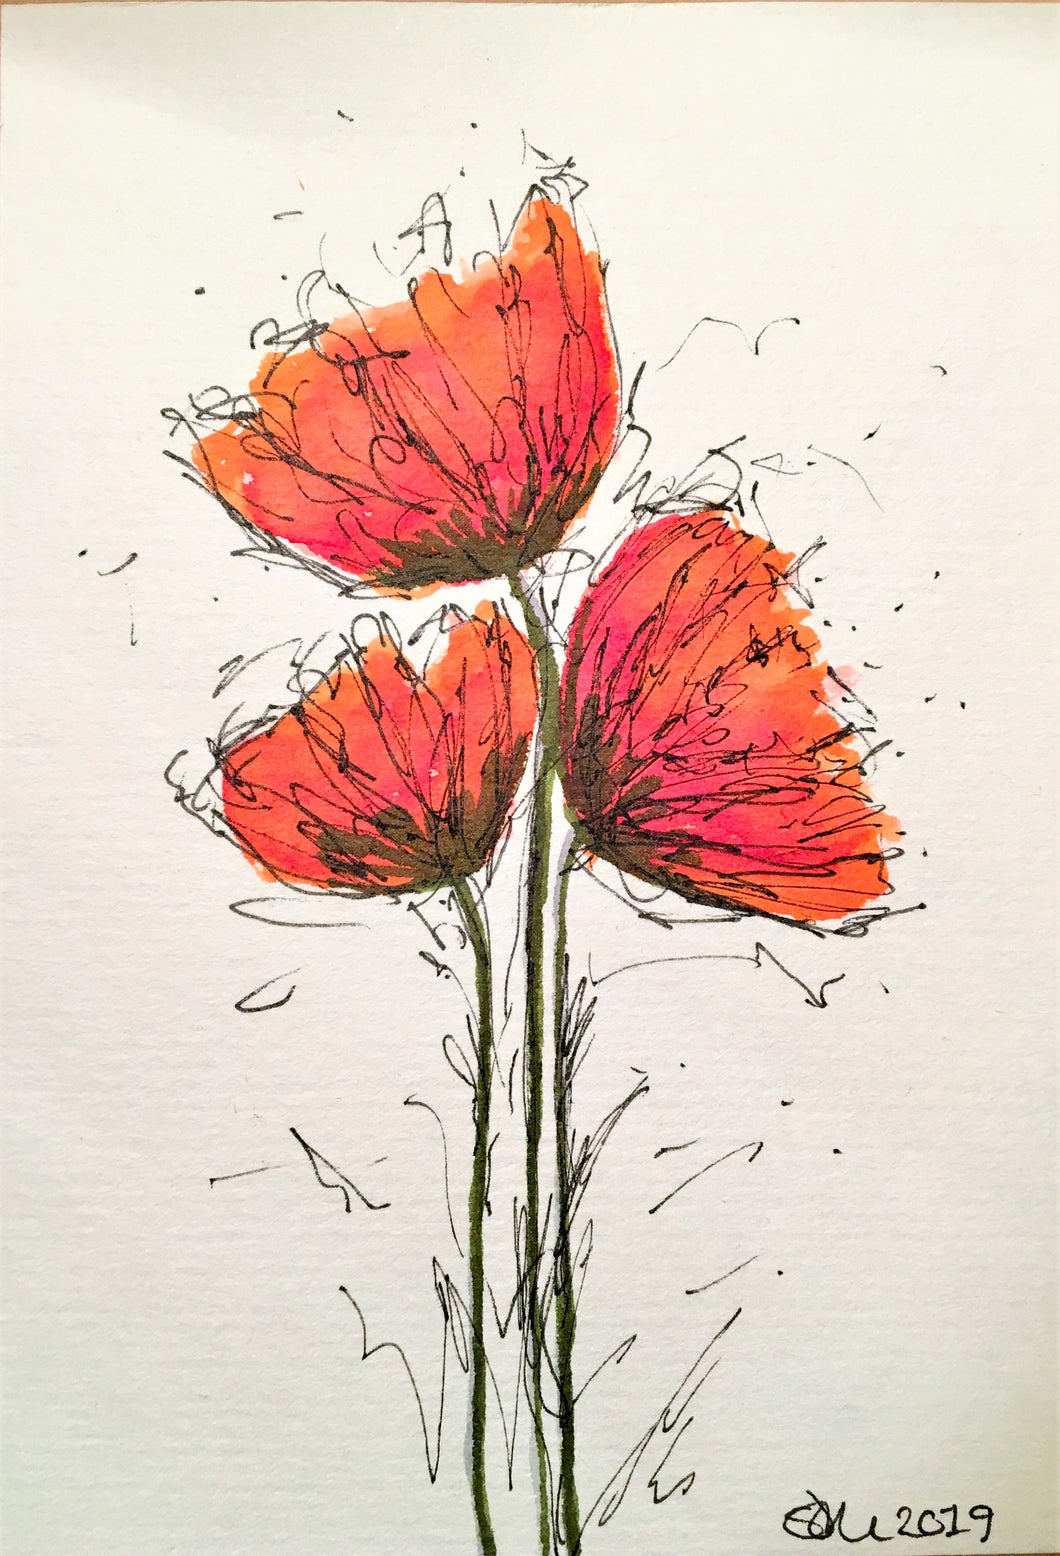 Handpainted Watercolour Greeting Card - Small Abstract Red/Orange Poppy Flowers - eDgE dEsiGn London